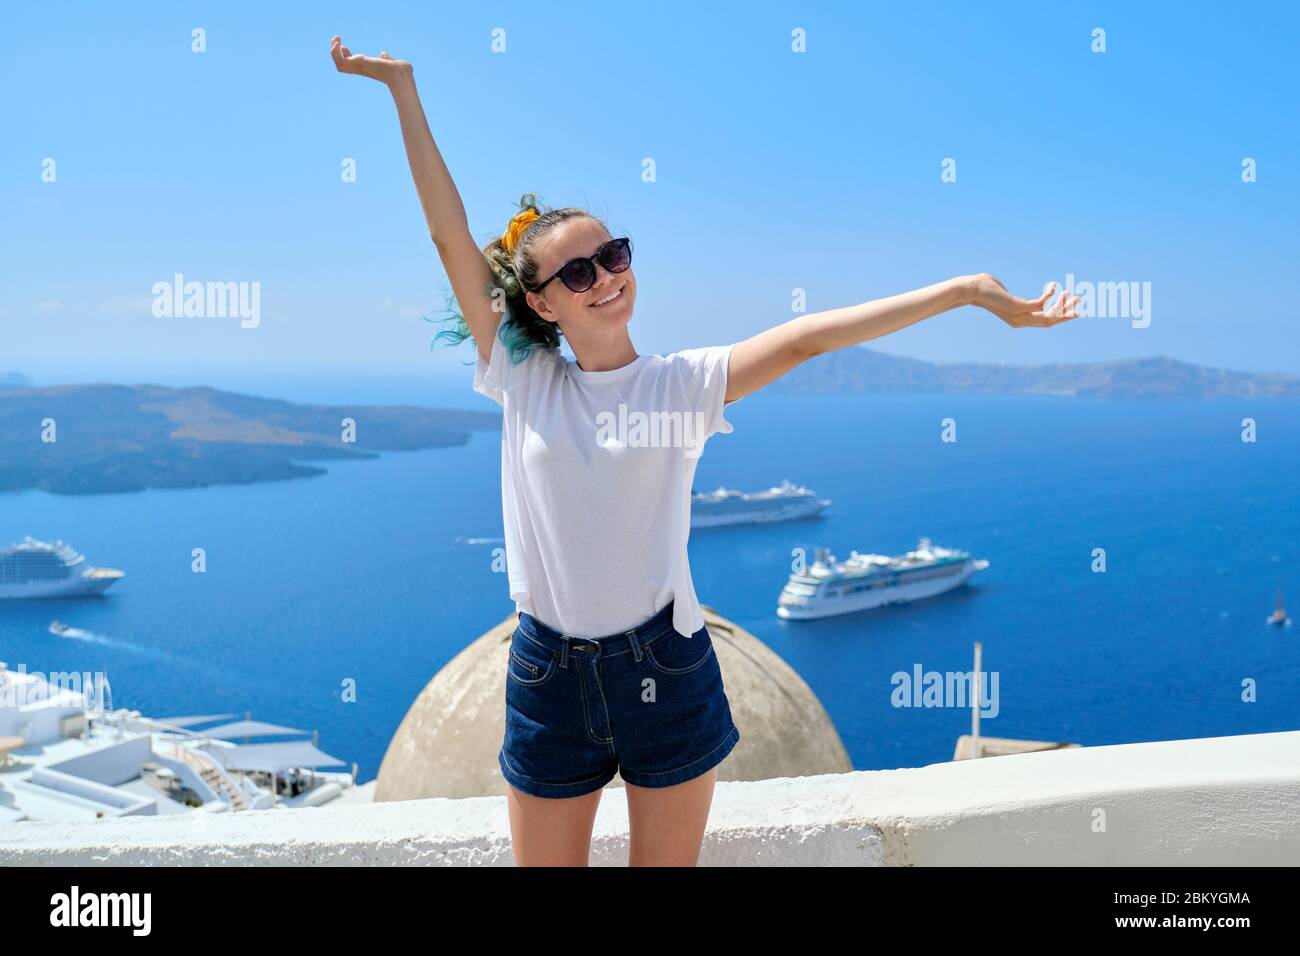 Teenager girl smiling, background sea landscape with white cruise liners Stock Photo